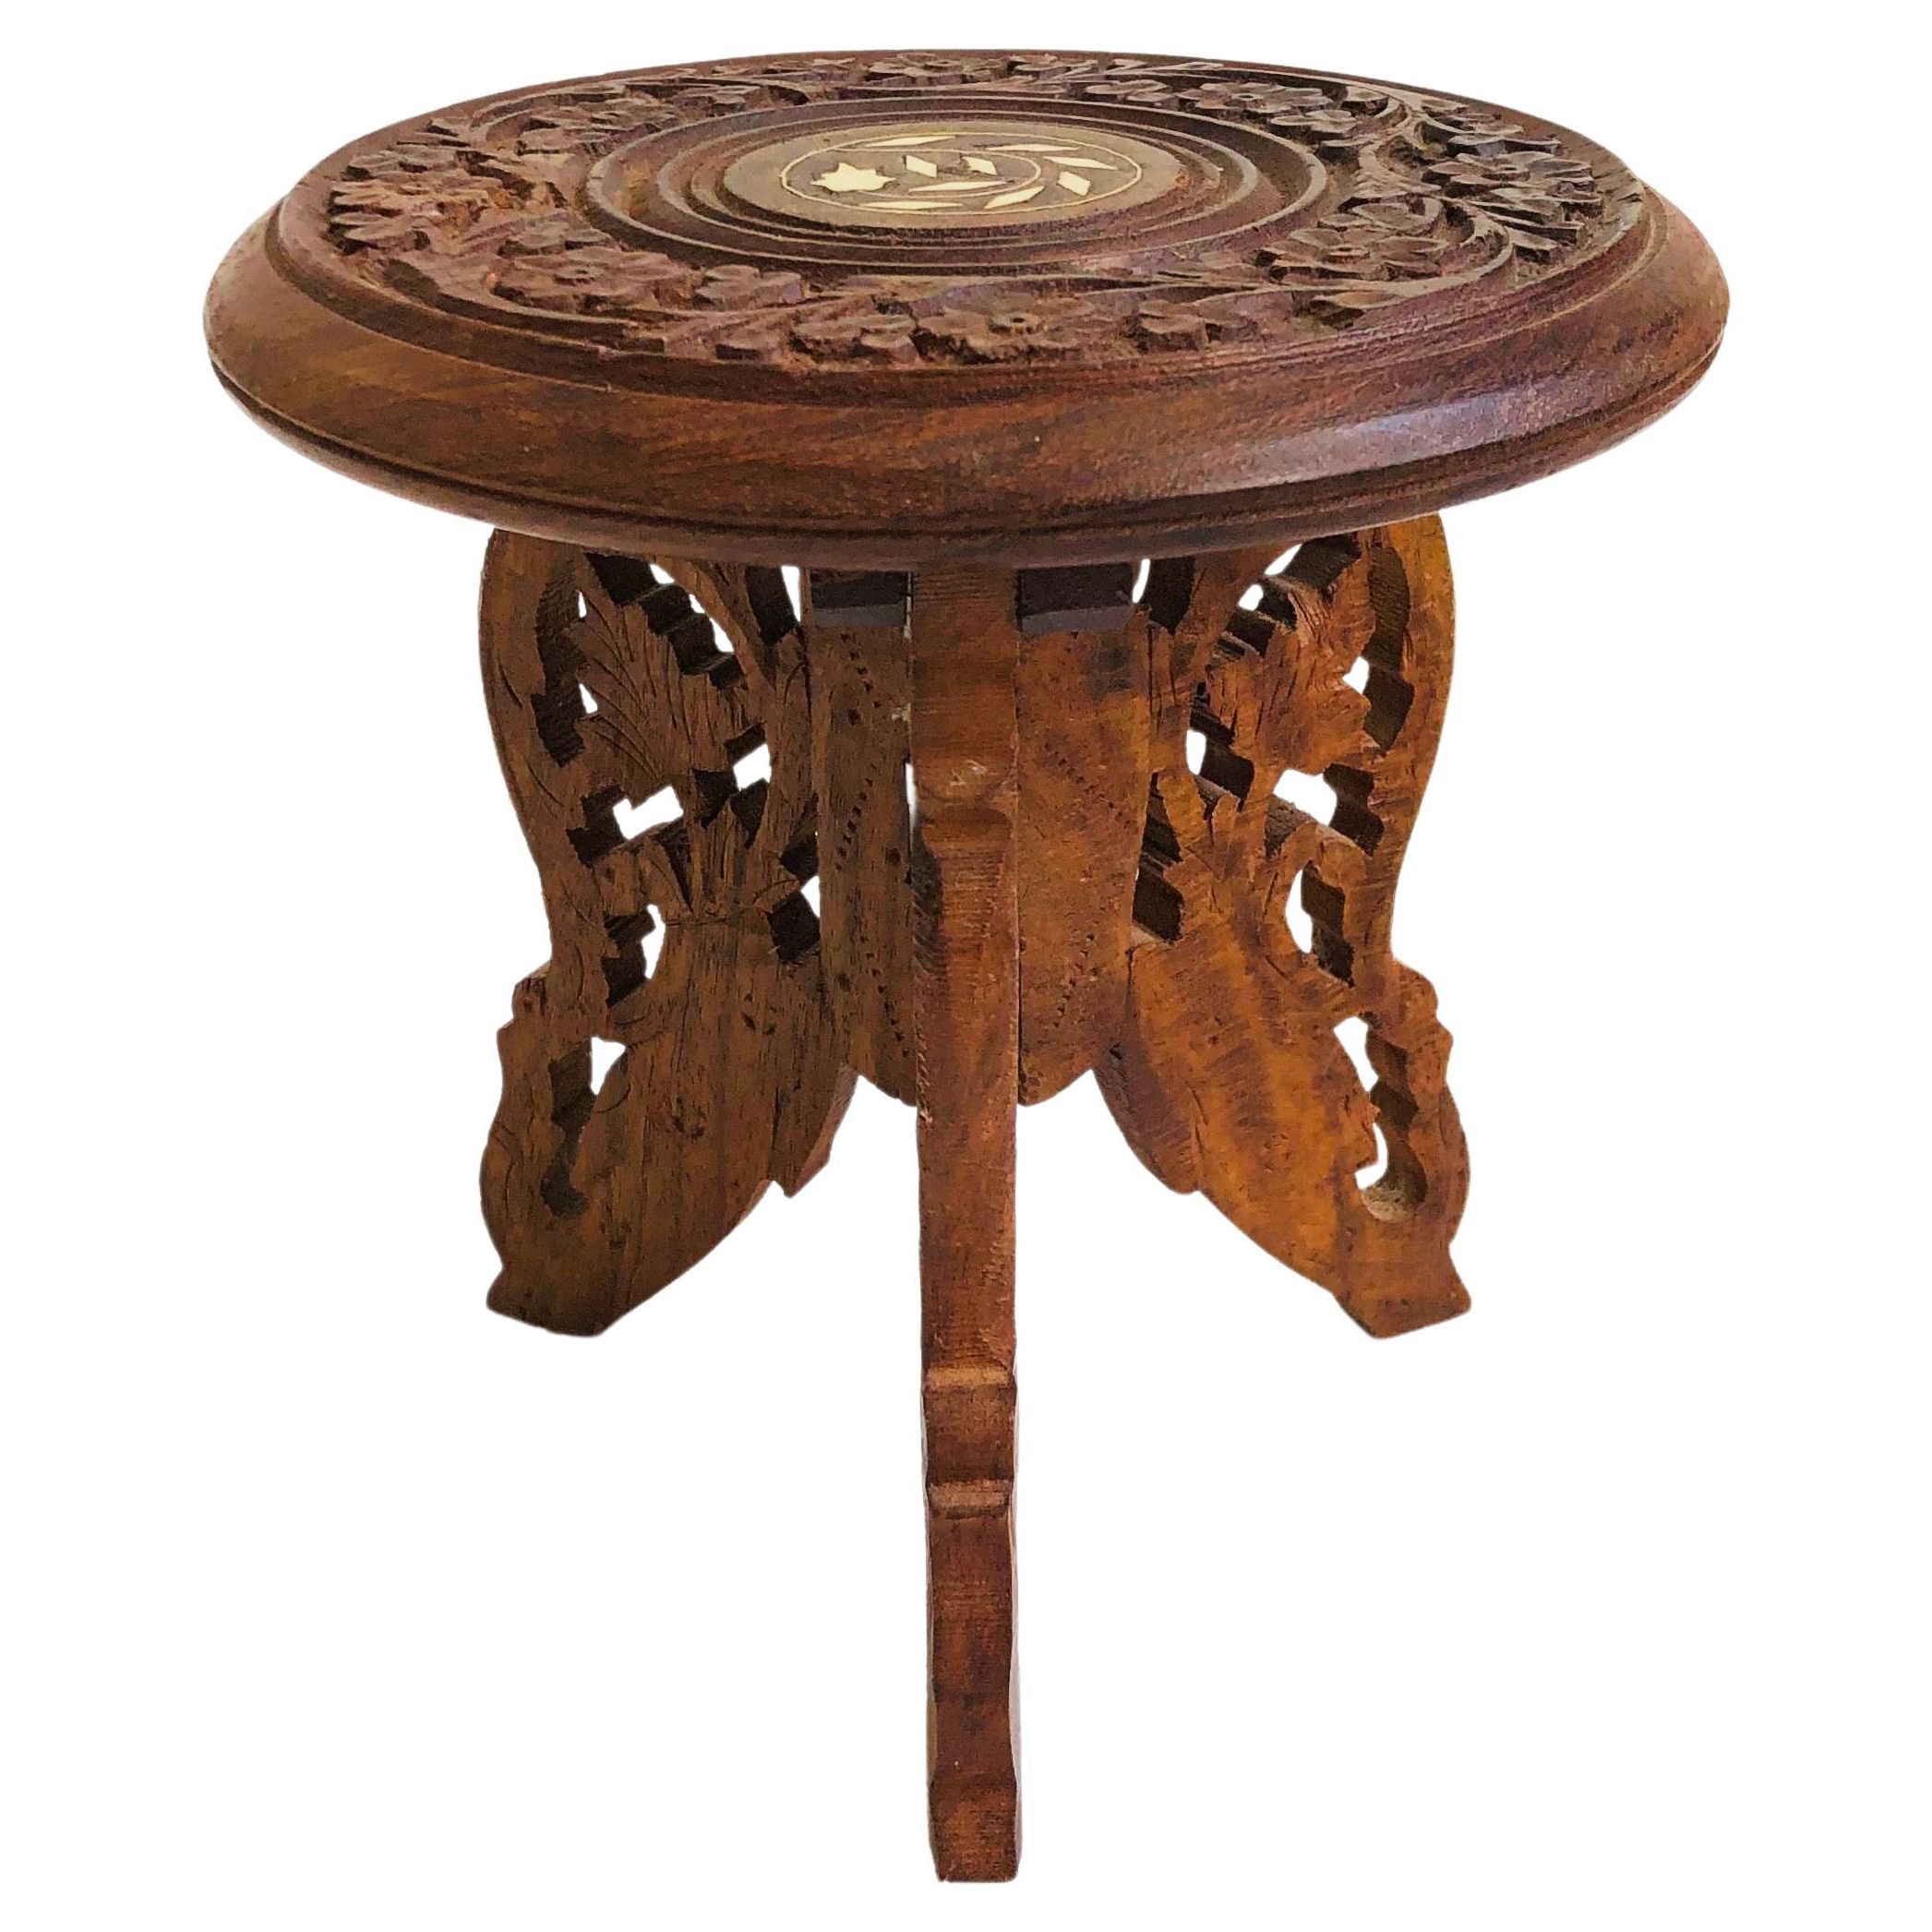 2019 Carved Plant Stands Pertaining To Vintage Medium Carved Wood Plant Stand For Sale At 1stdibs (View 3 of 10)